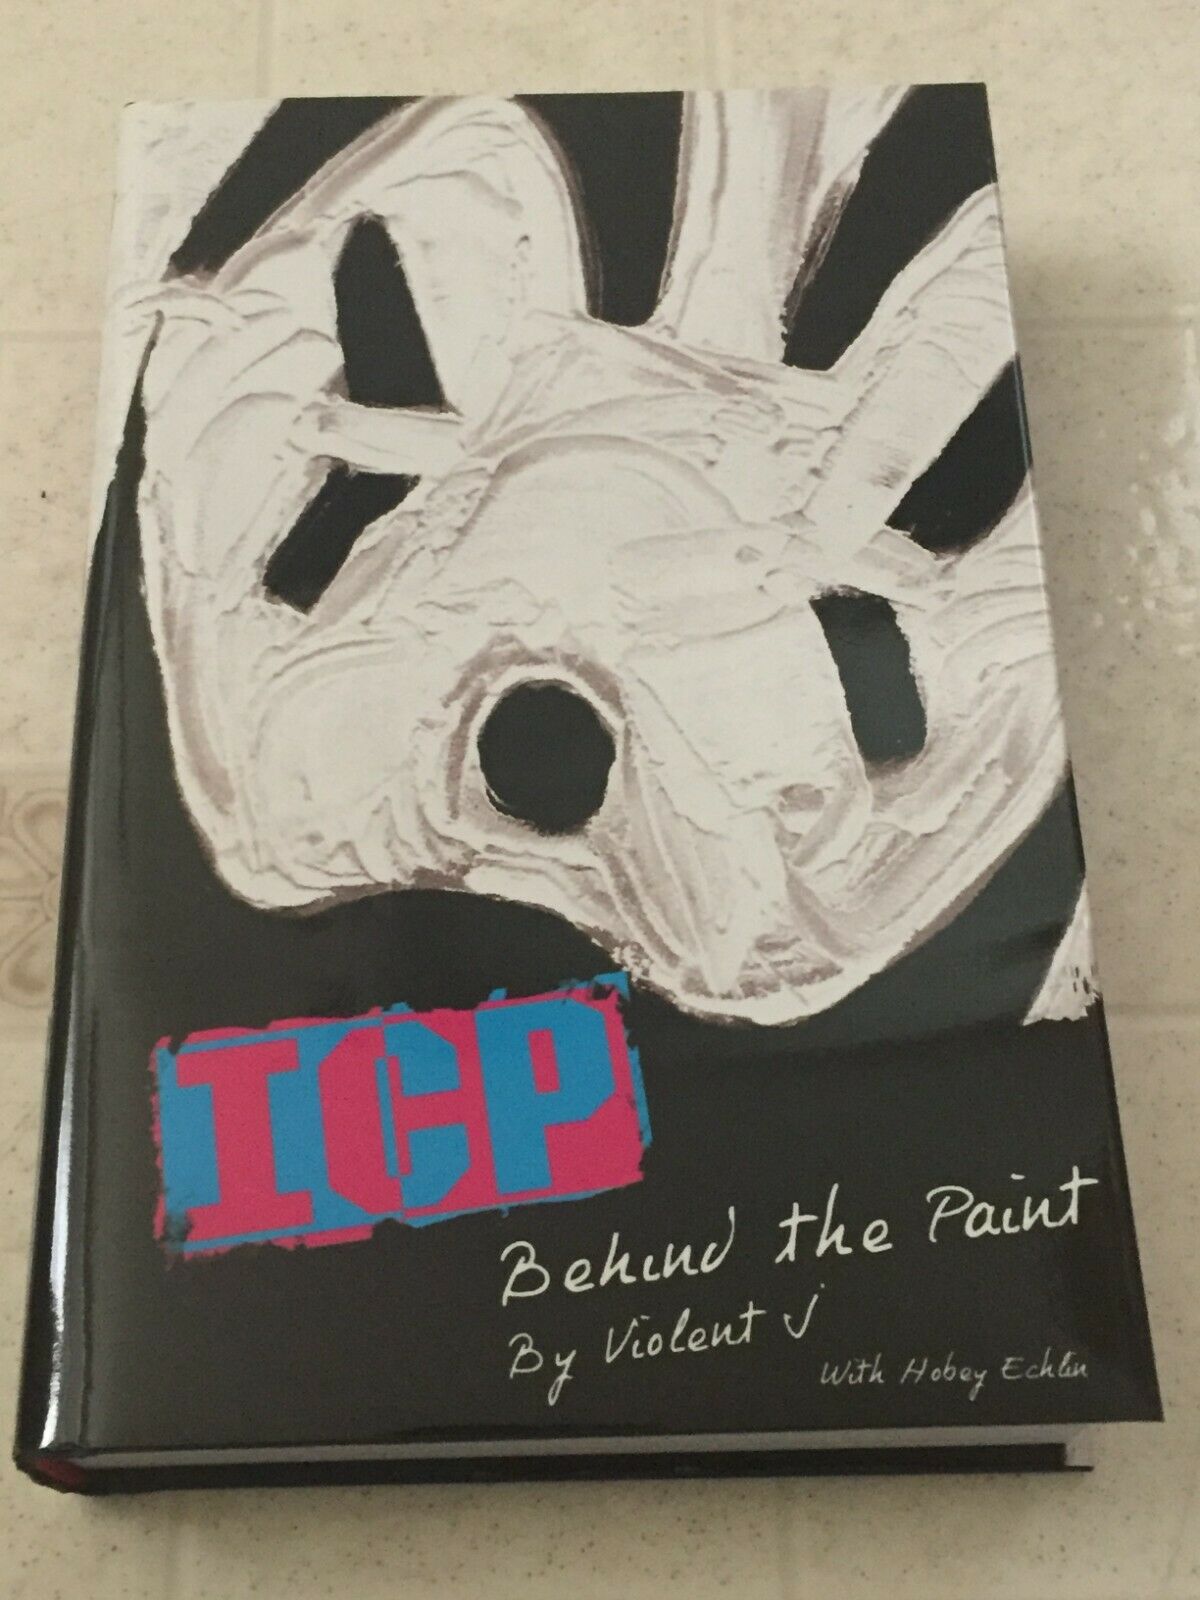 Icp Behind The Paint By Violent J Hardcover Book Insane Clown Posse New!